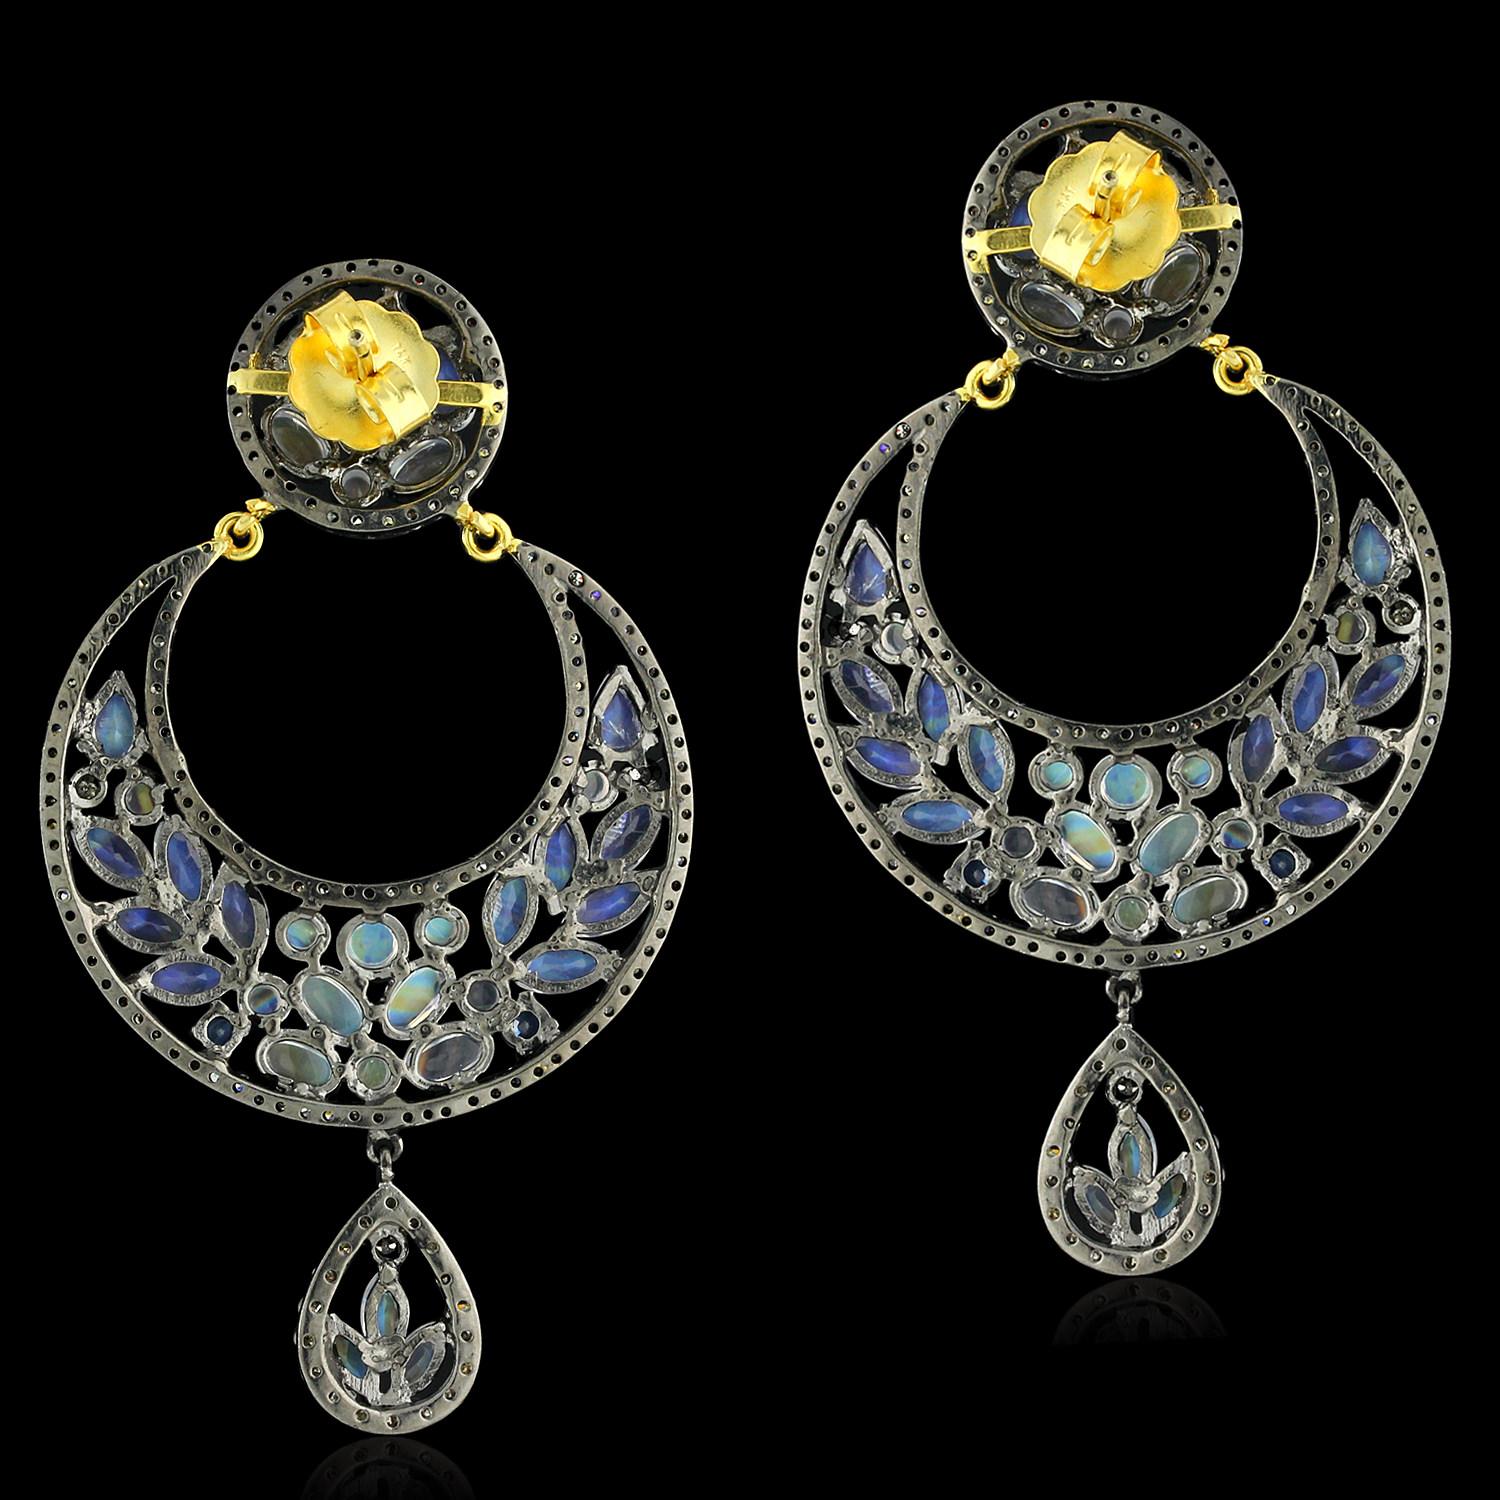 These stunning half moon shaped earrings feature a beautiful blend of sapphires and moonstones, accented with sparkling pave diamonds. The combination of the rich blue sapphires and the ethereal white moonstones creates a mesmerizing and elegant